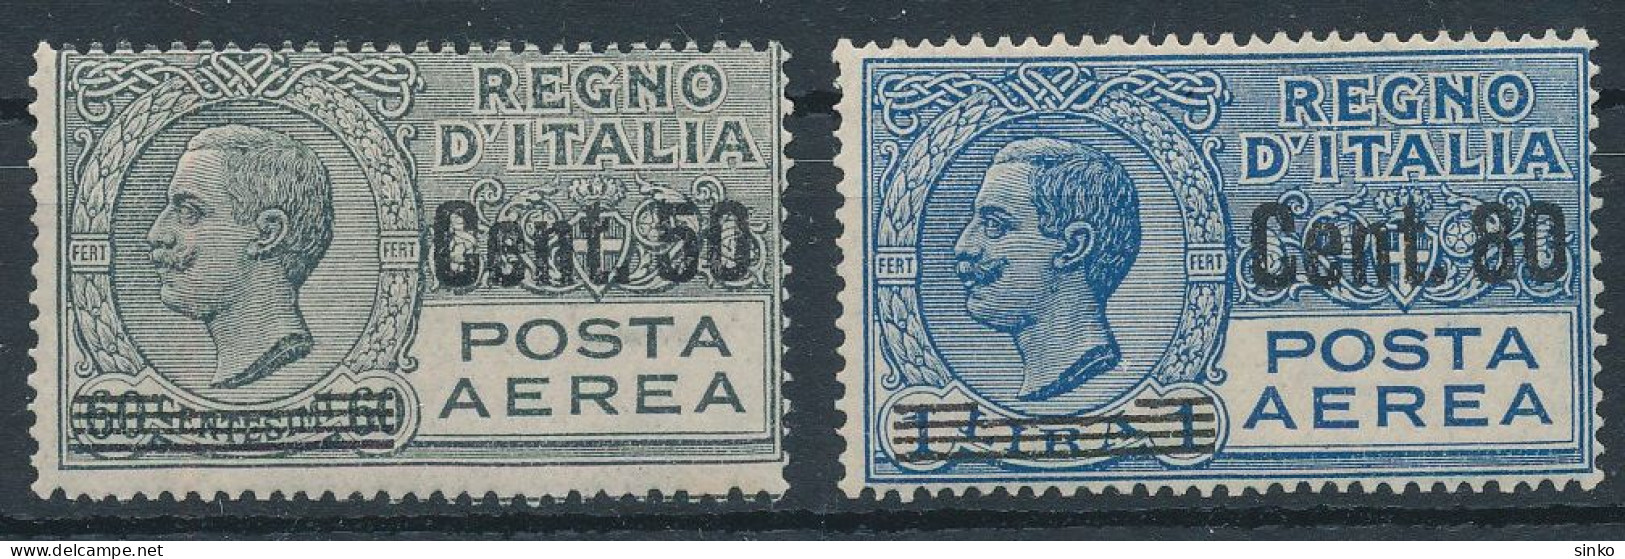 1927. Italy - Airmail - Airmail